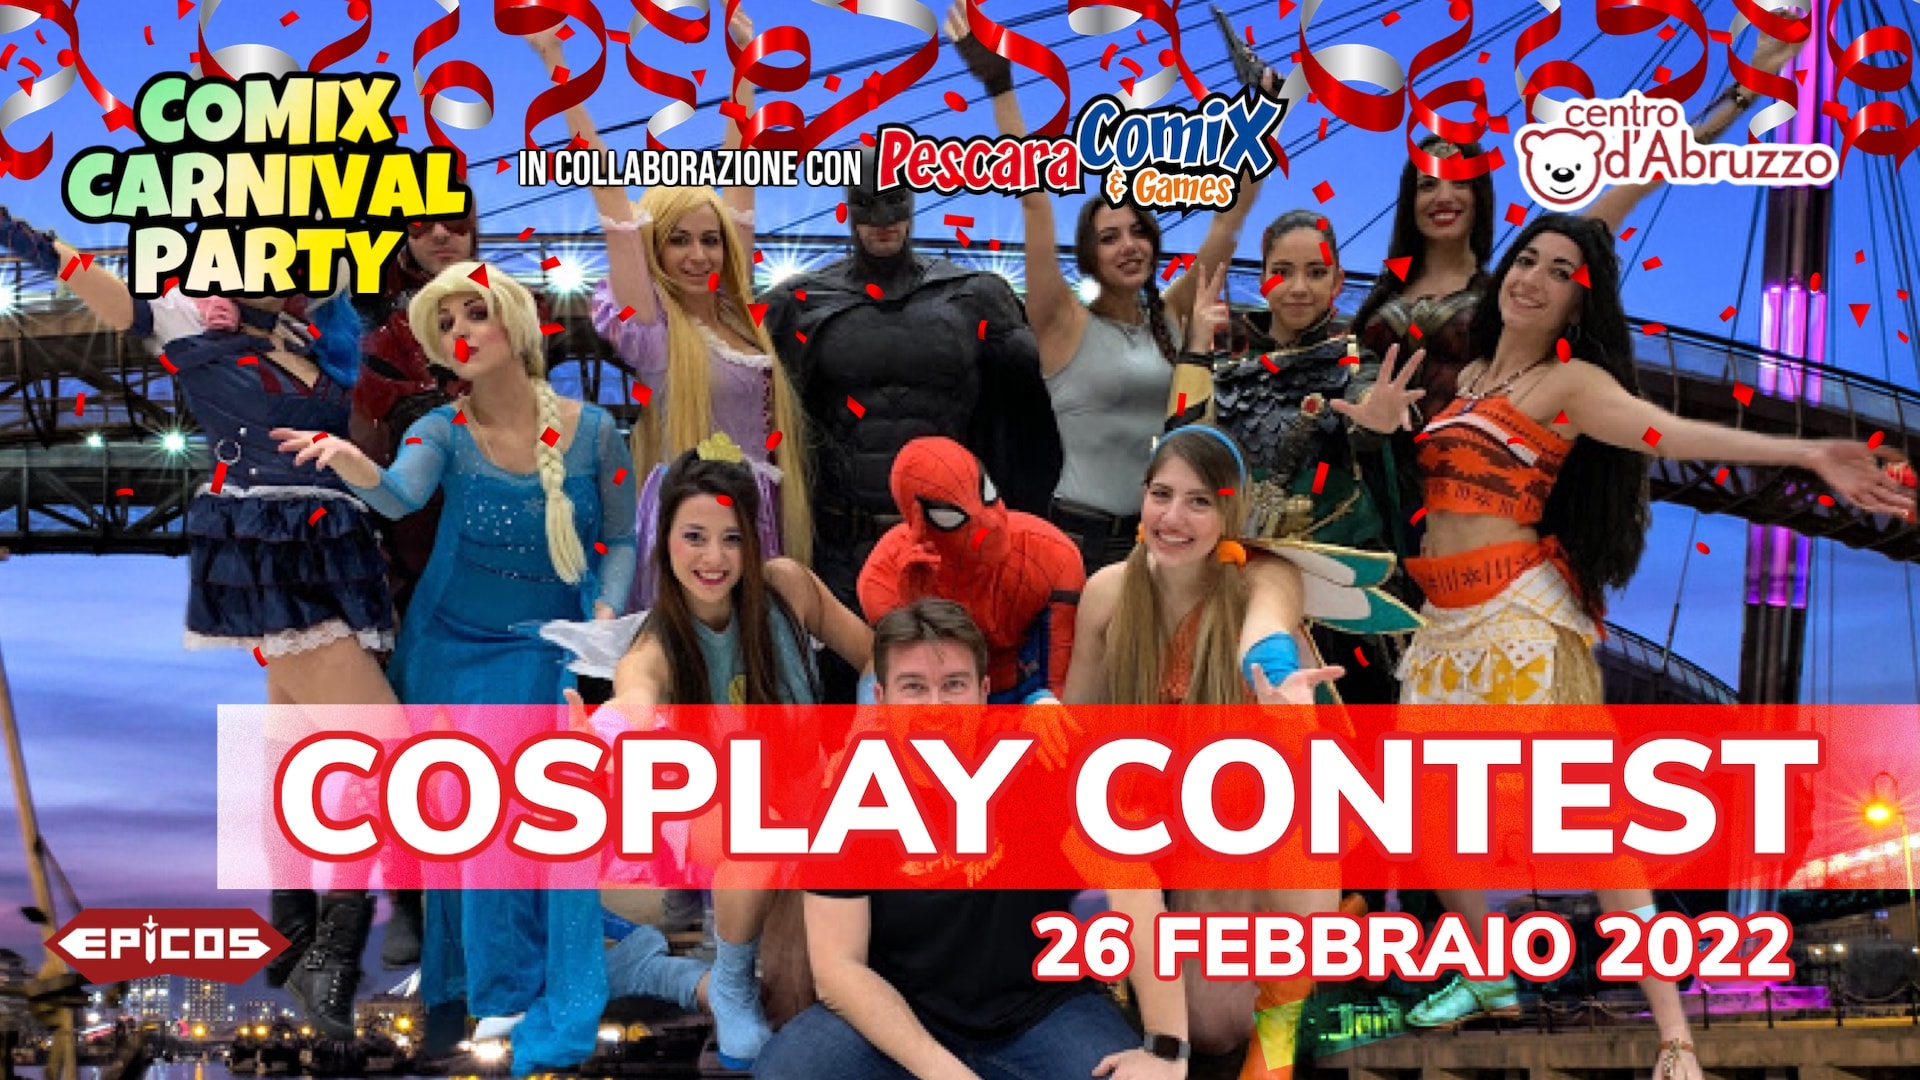 Comix Carnival Party – Cosplay Contest 2022